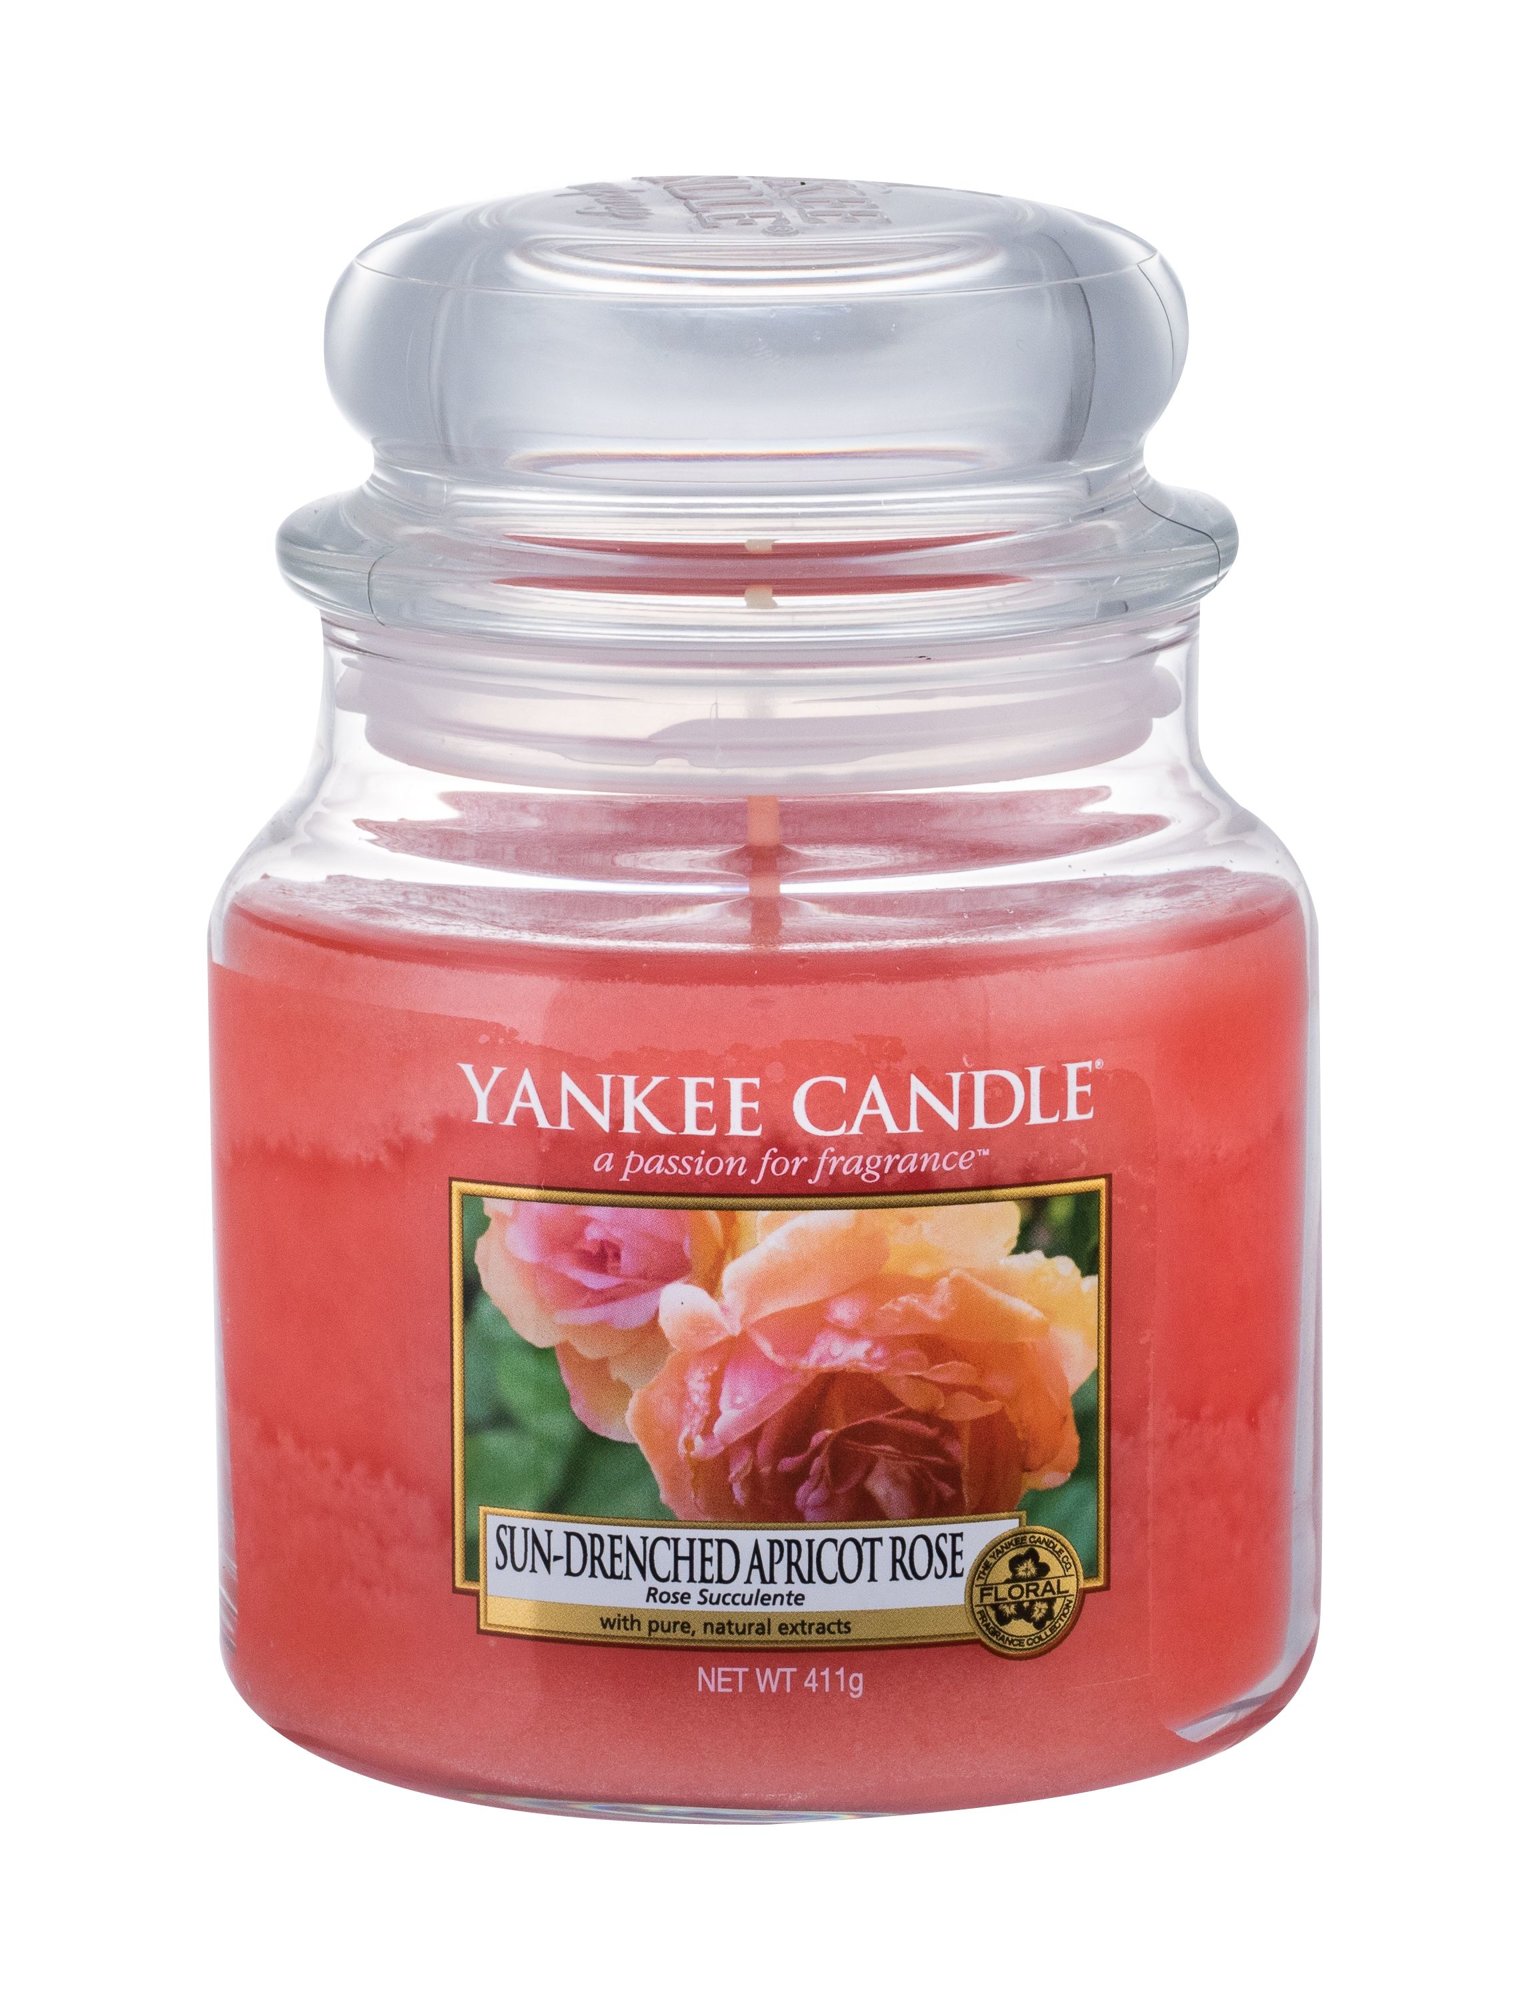 Yankee Candle Sun-Drenched Apricot Rose 411g Kvepalai Unisex Scented Candle